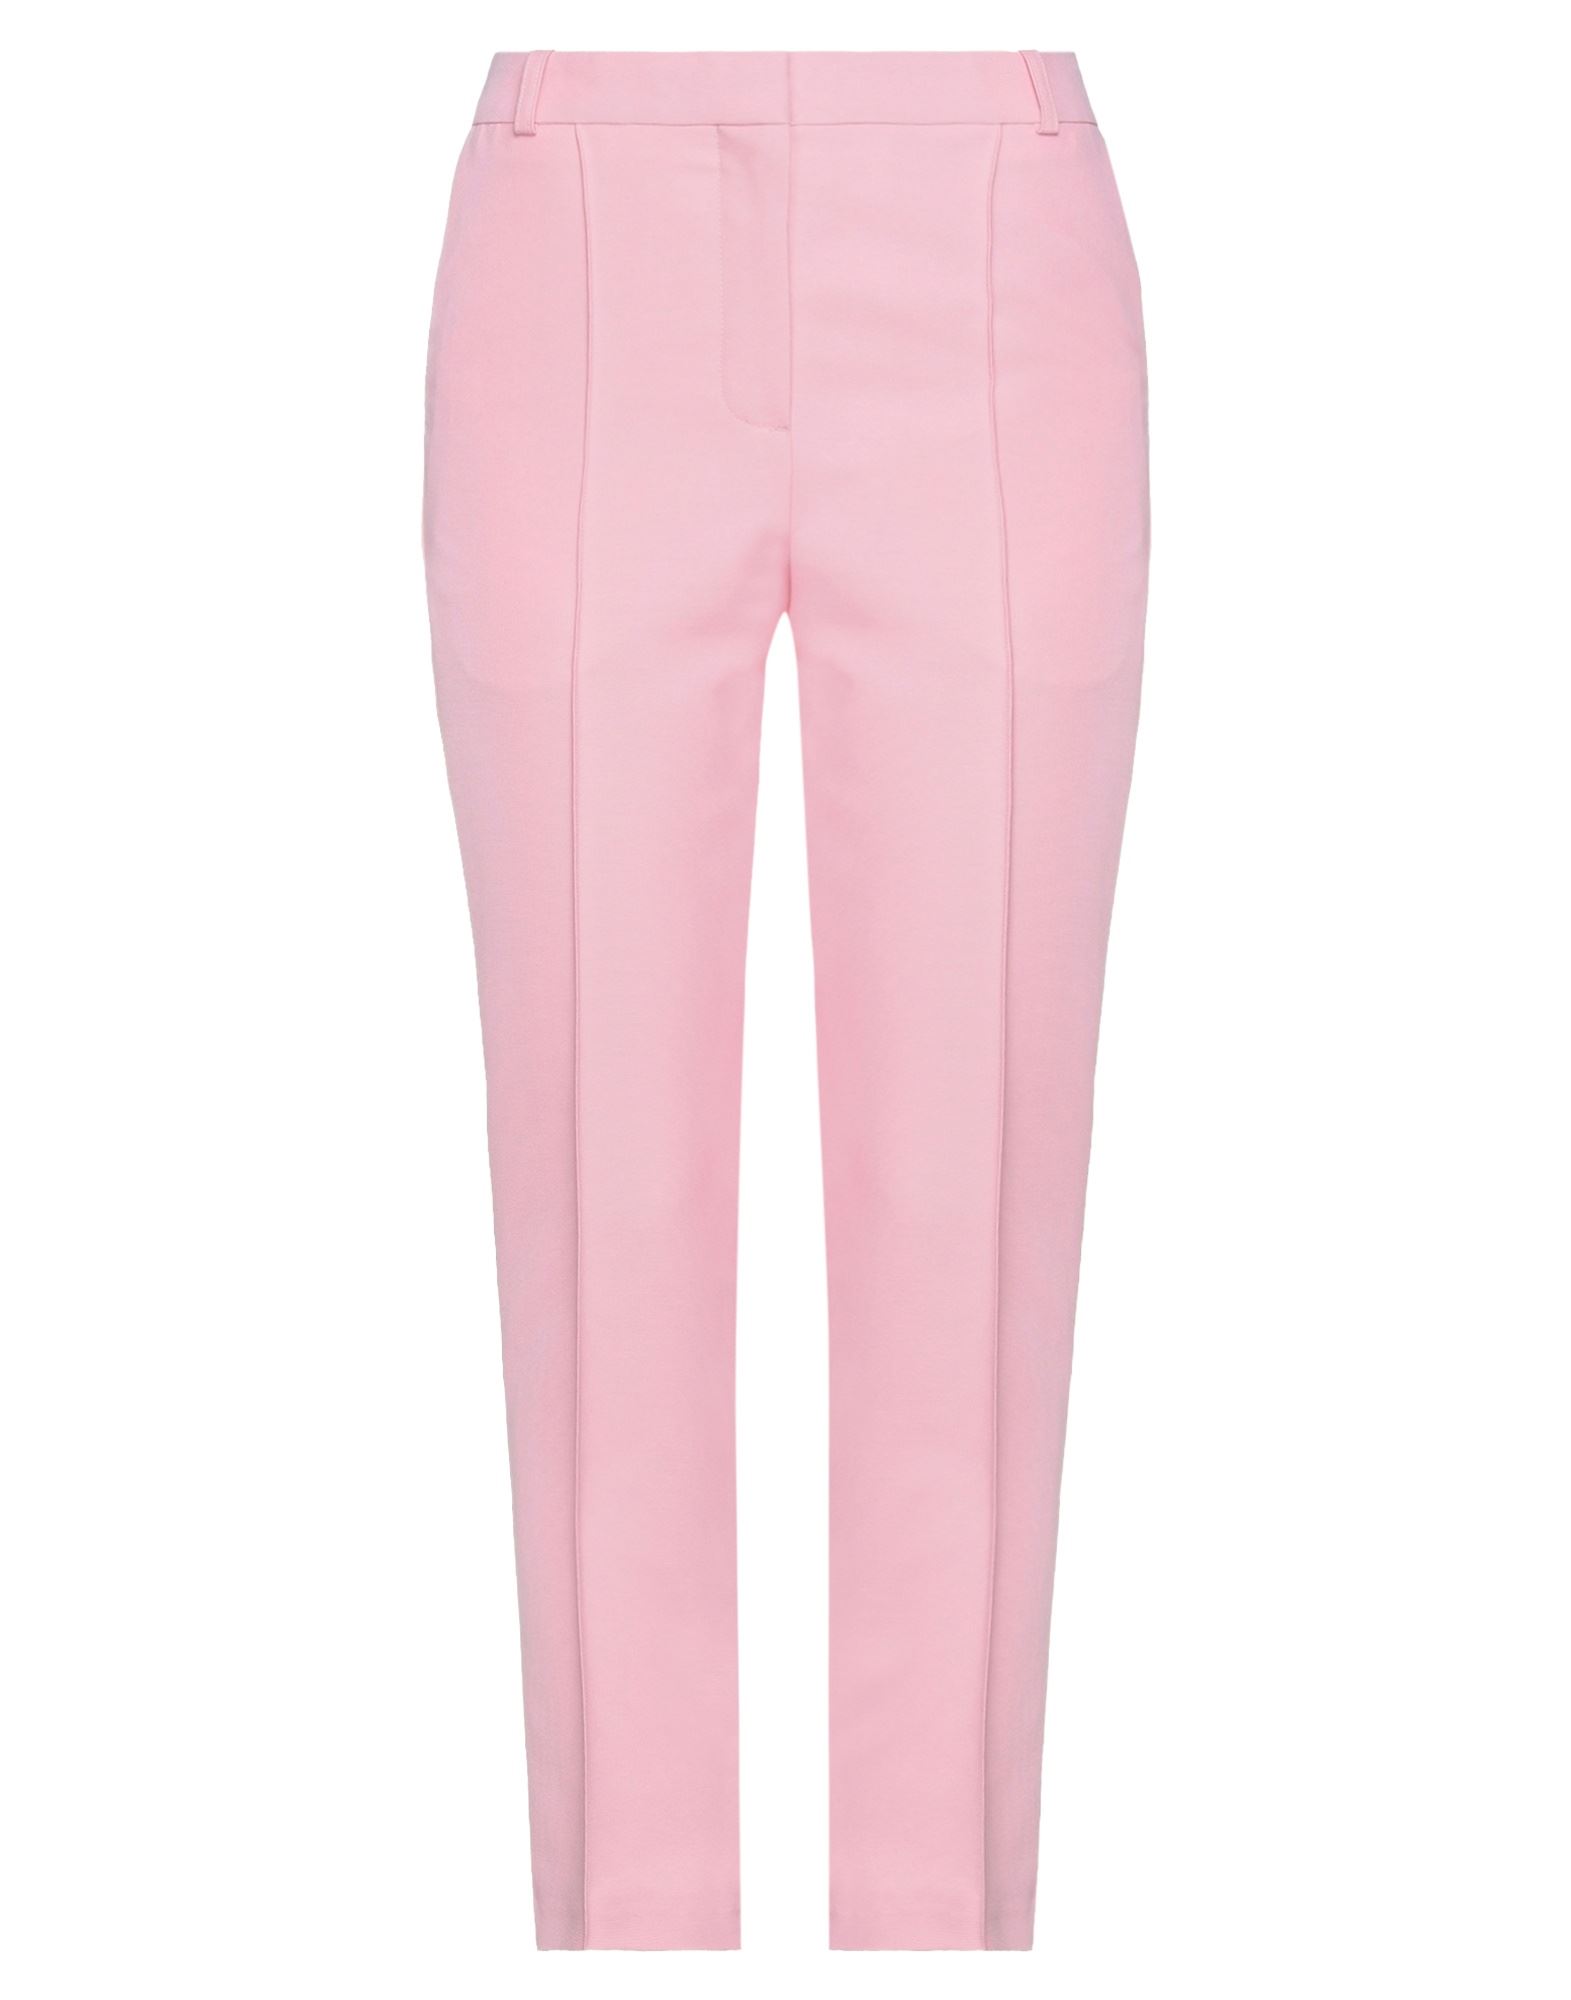 MULBERRY MULBERRY WOMAN PANTS PINK SIZE 8 POLYESTER,13567537IU 5